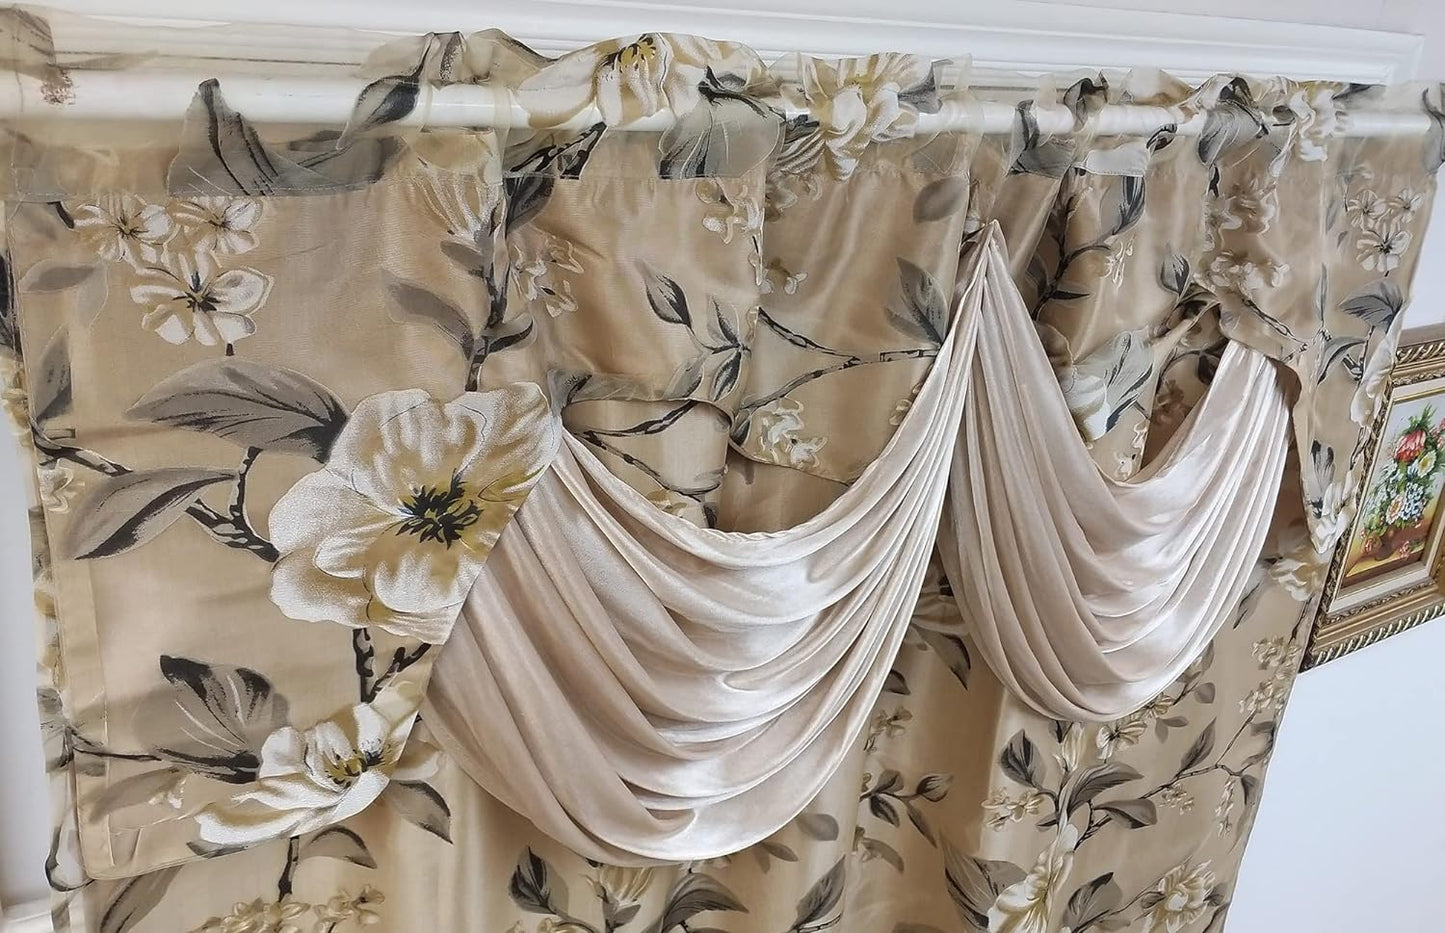 GOHD Roman Romance. Burnt-Out Printed Organza Window Curtain Panel Drape with Attached Fancy Valance and Taffeta Backing (Sand, 55 X 84 Inches + Attached Valance X 2Pcs)